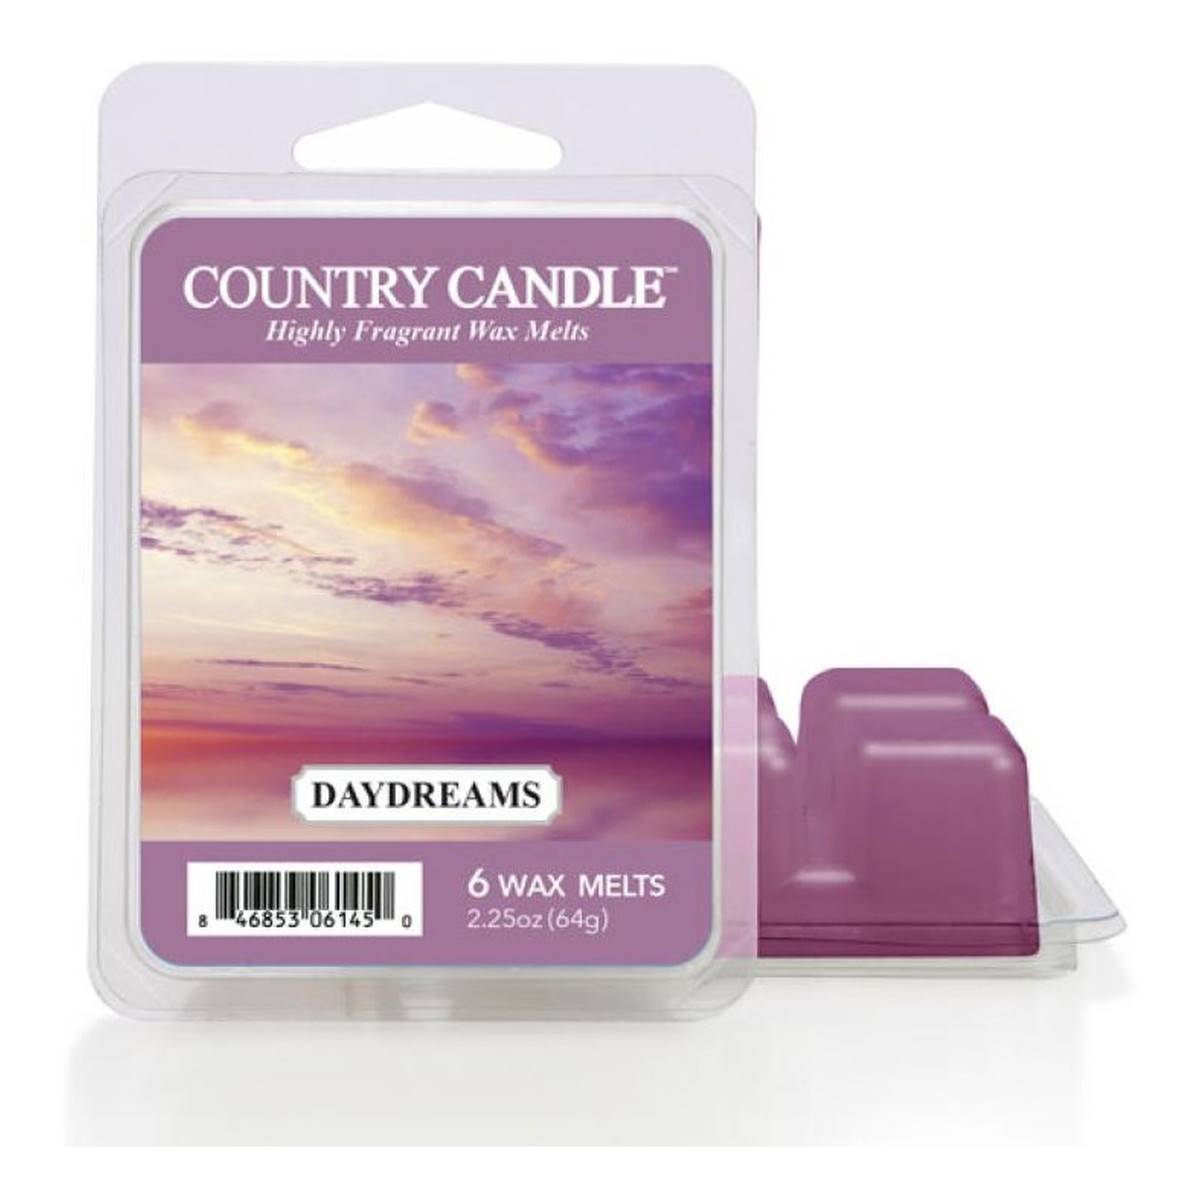 Country Candle Wax wosk zapachowy daydreams 64g